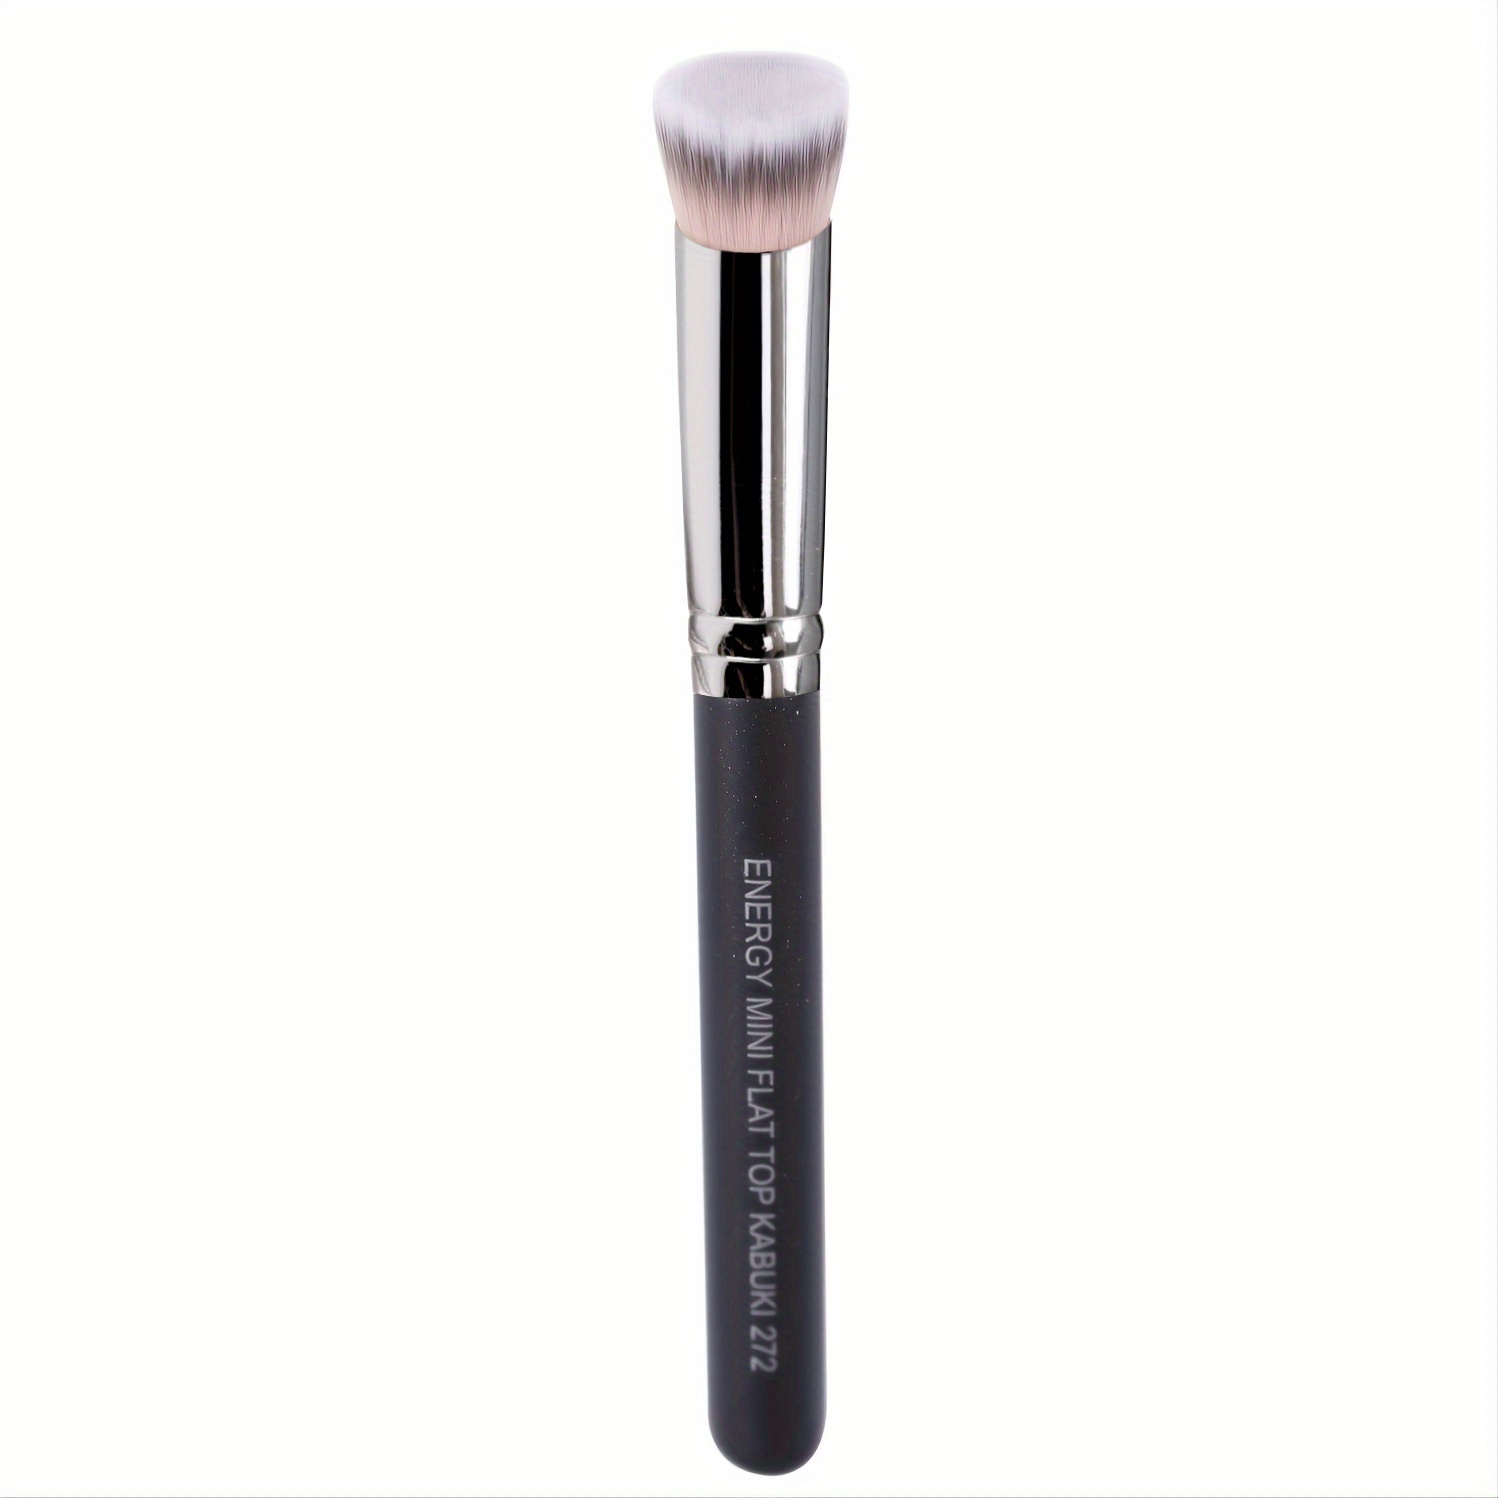 ENERGY Concealer Brush - Mini Flat Top Kabuki Brush for Smooth and Even  Application of Concealer, Foundation, and Primer - Vegan and Synthetic